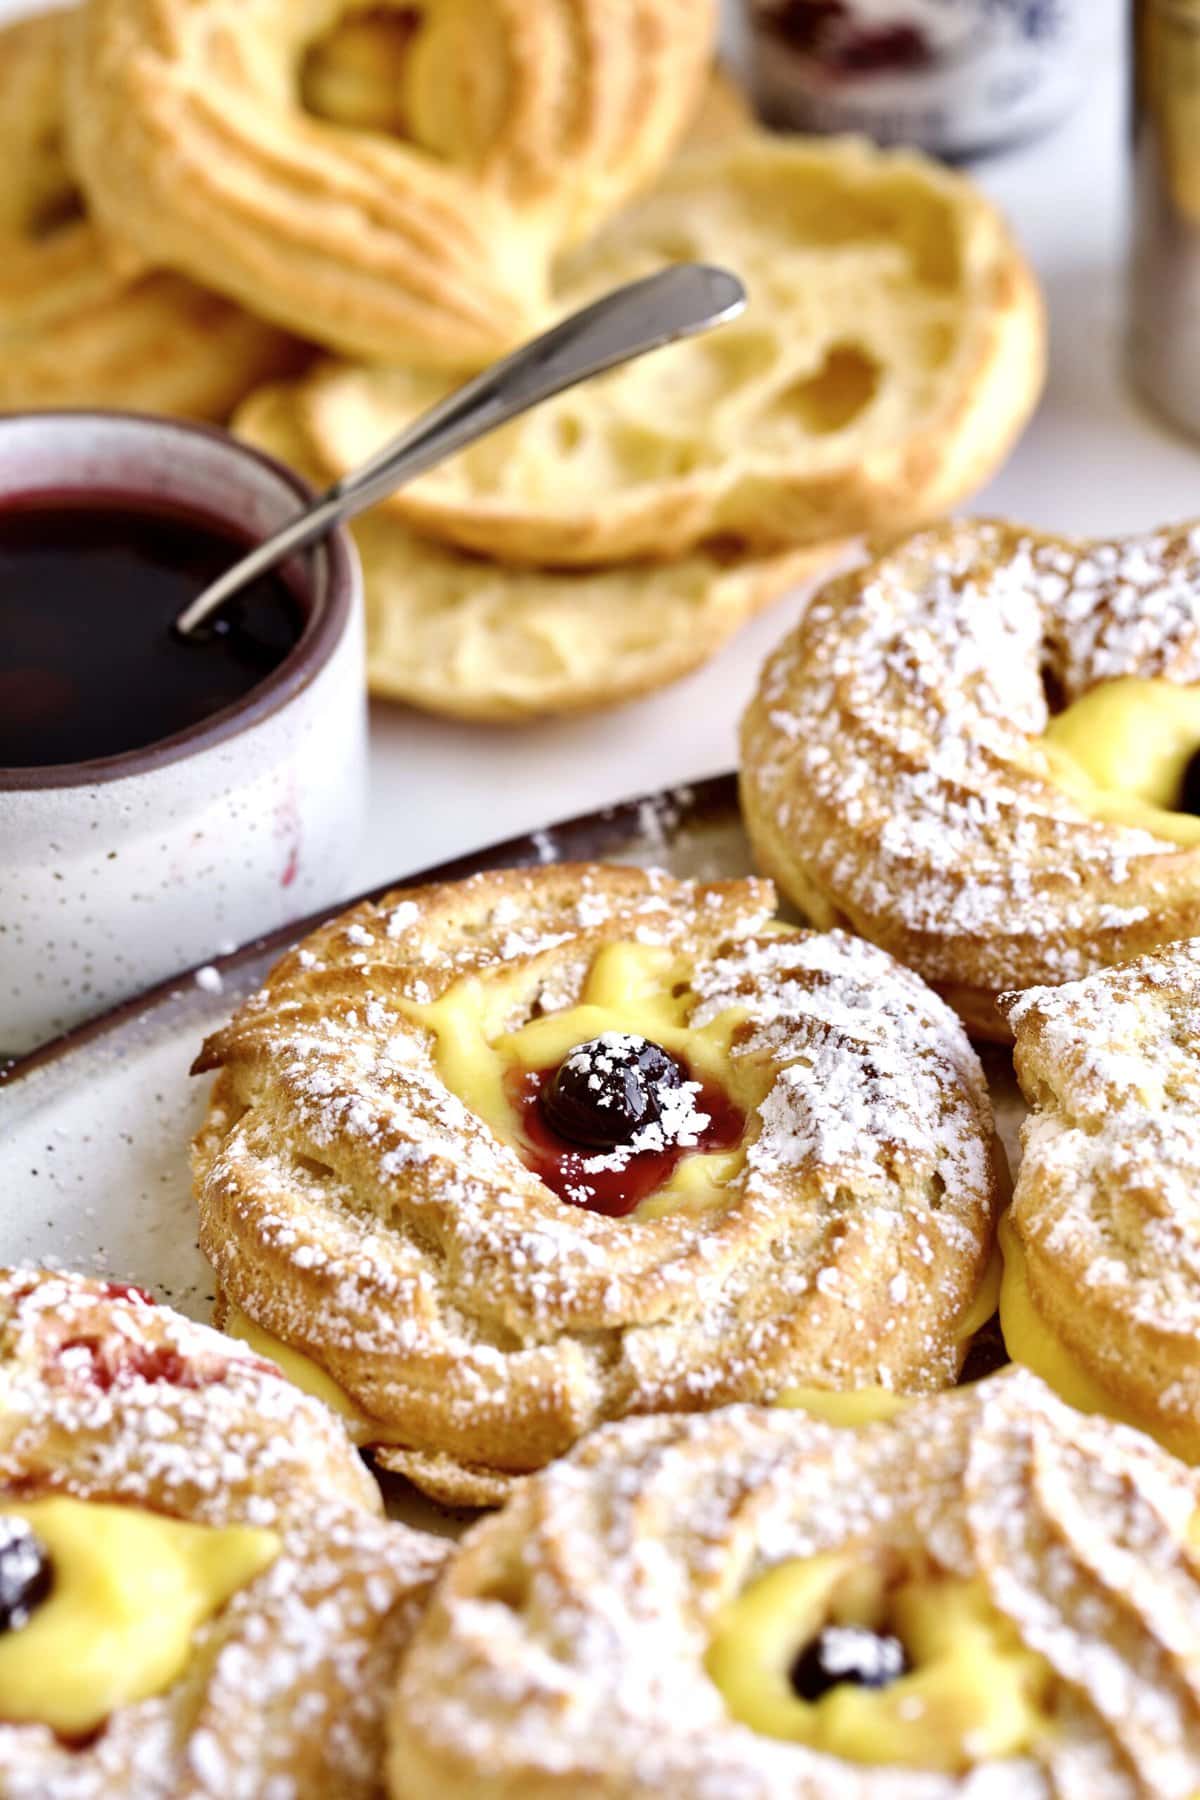 close up of finished baked zeppole filled with Italian pastry cream and Italian Amarena cherries. In the background there is a stack of unfilled zeppole and cherries.